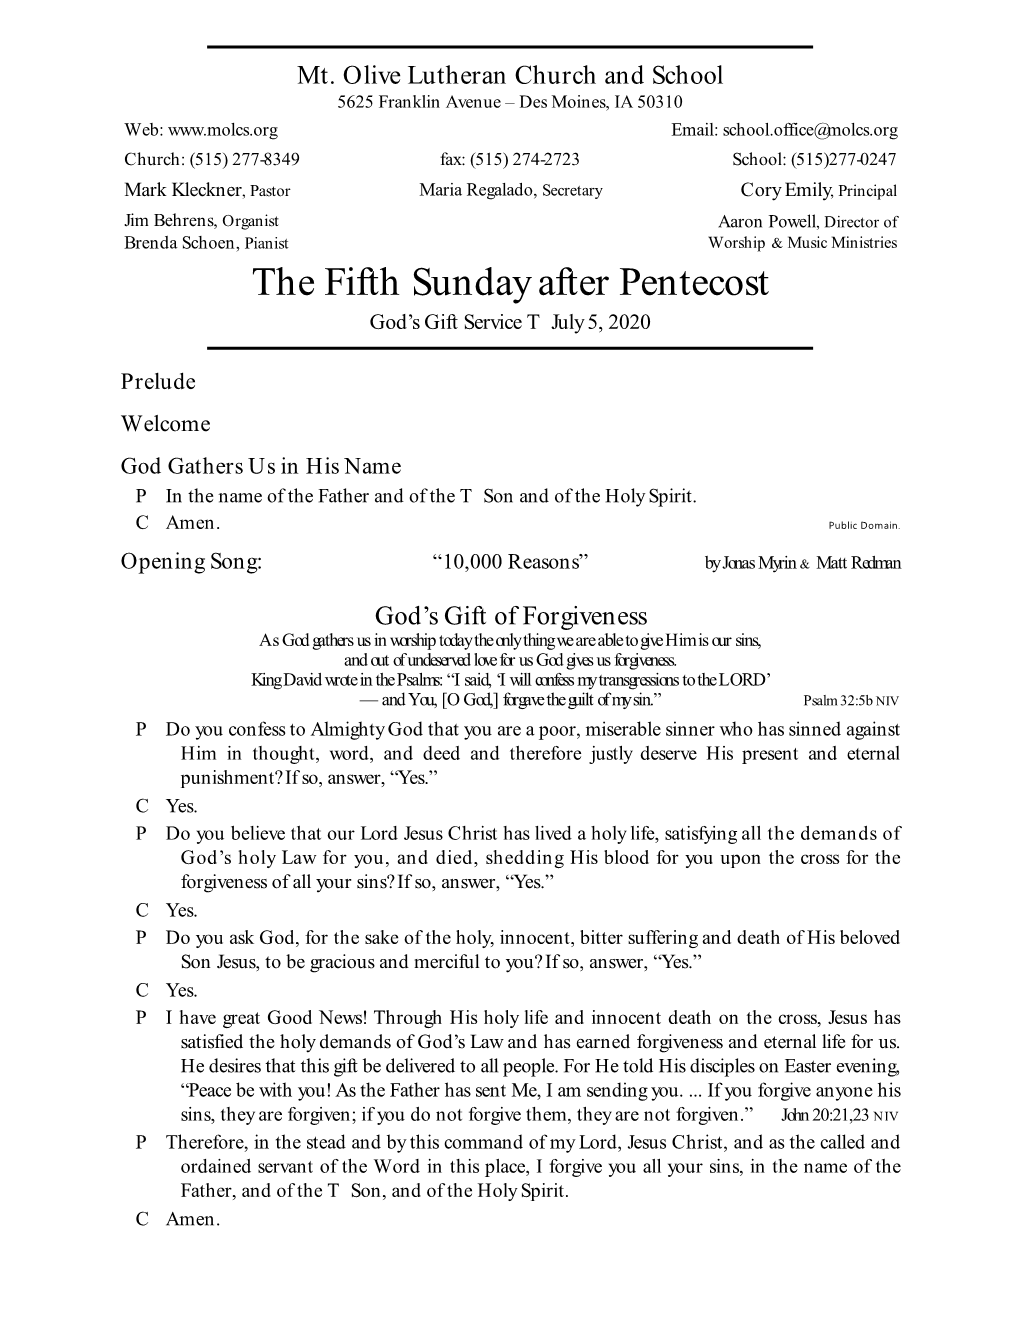 The Fifth Sunday After Pentecost God’S Gift Service T July 5, 2020